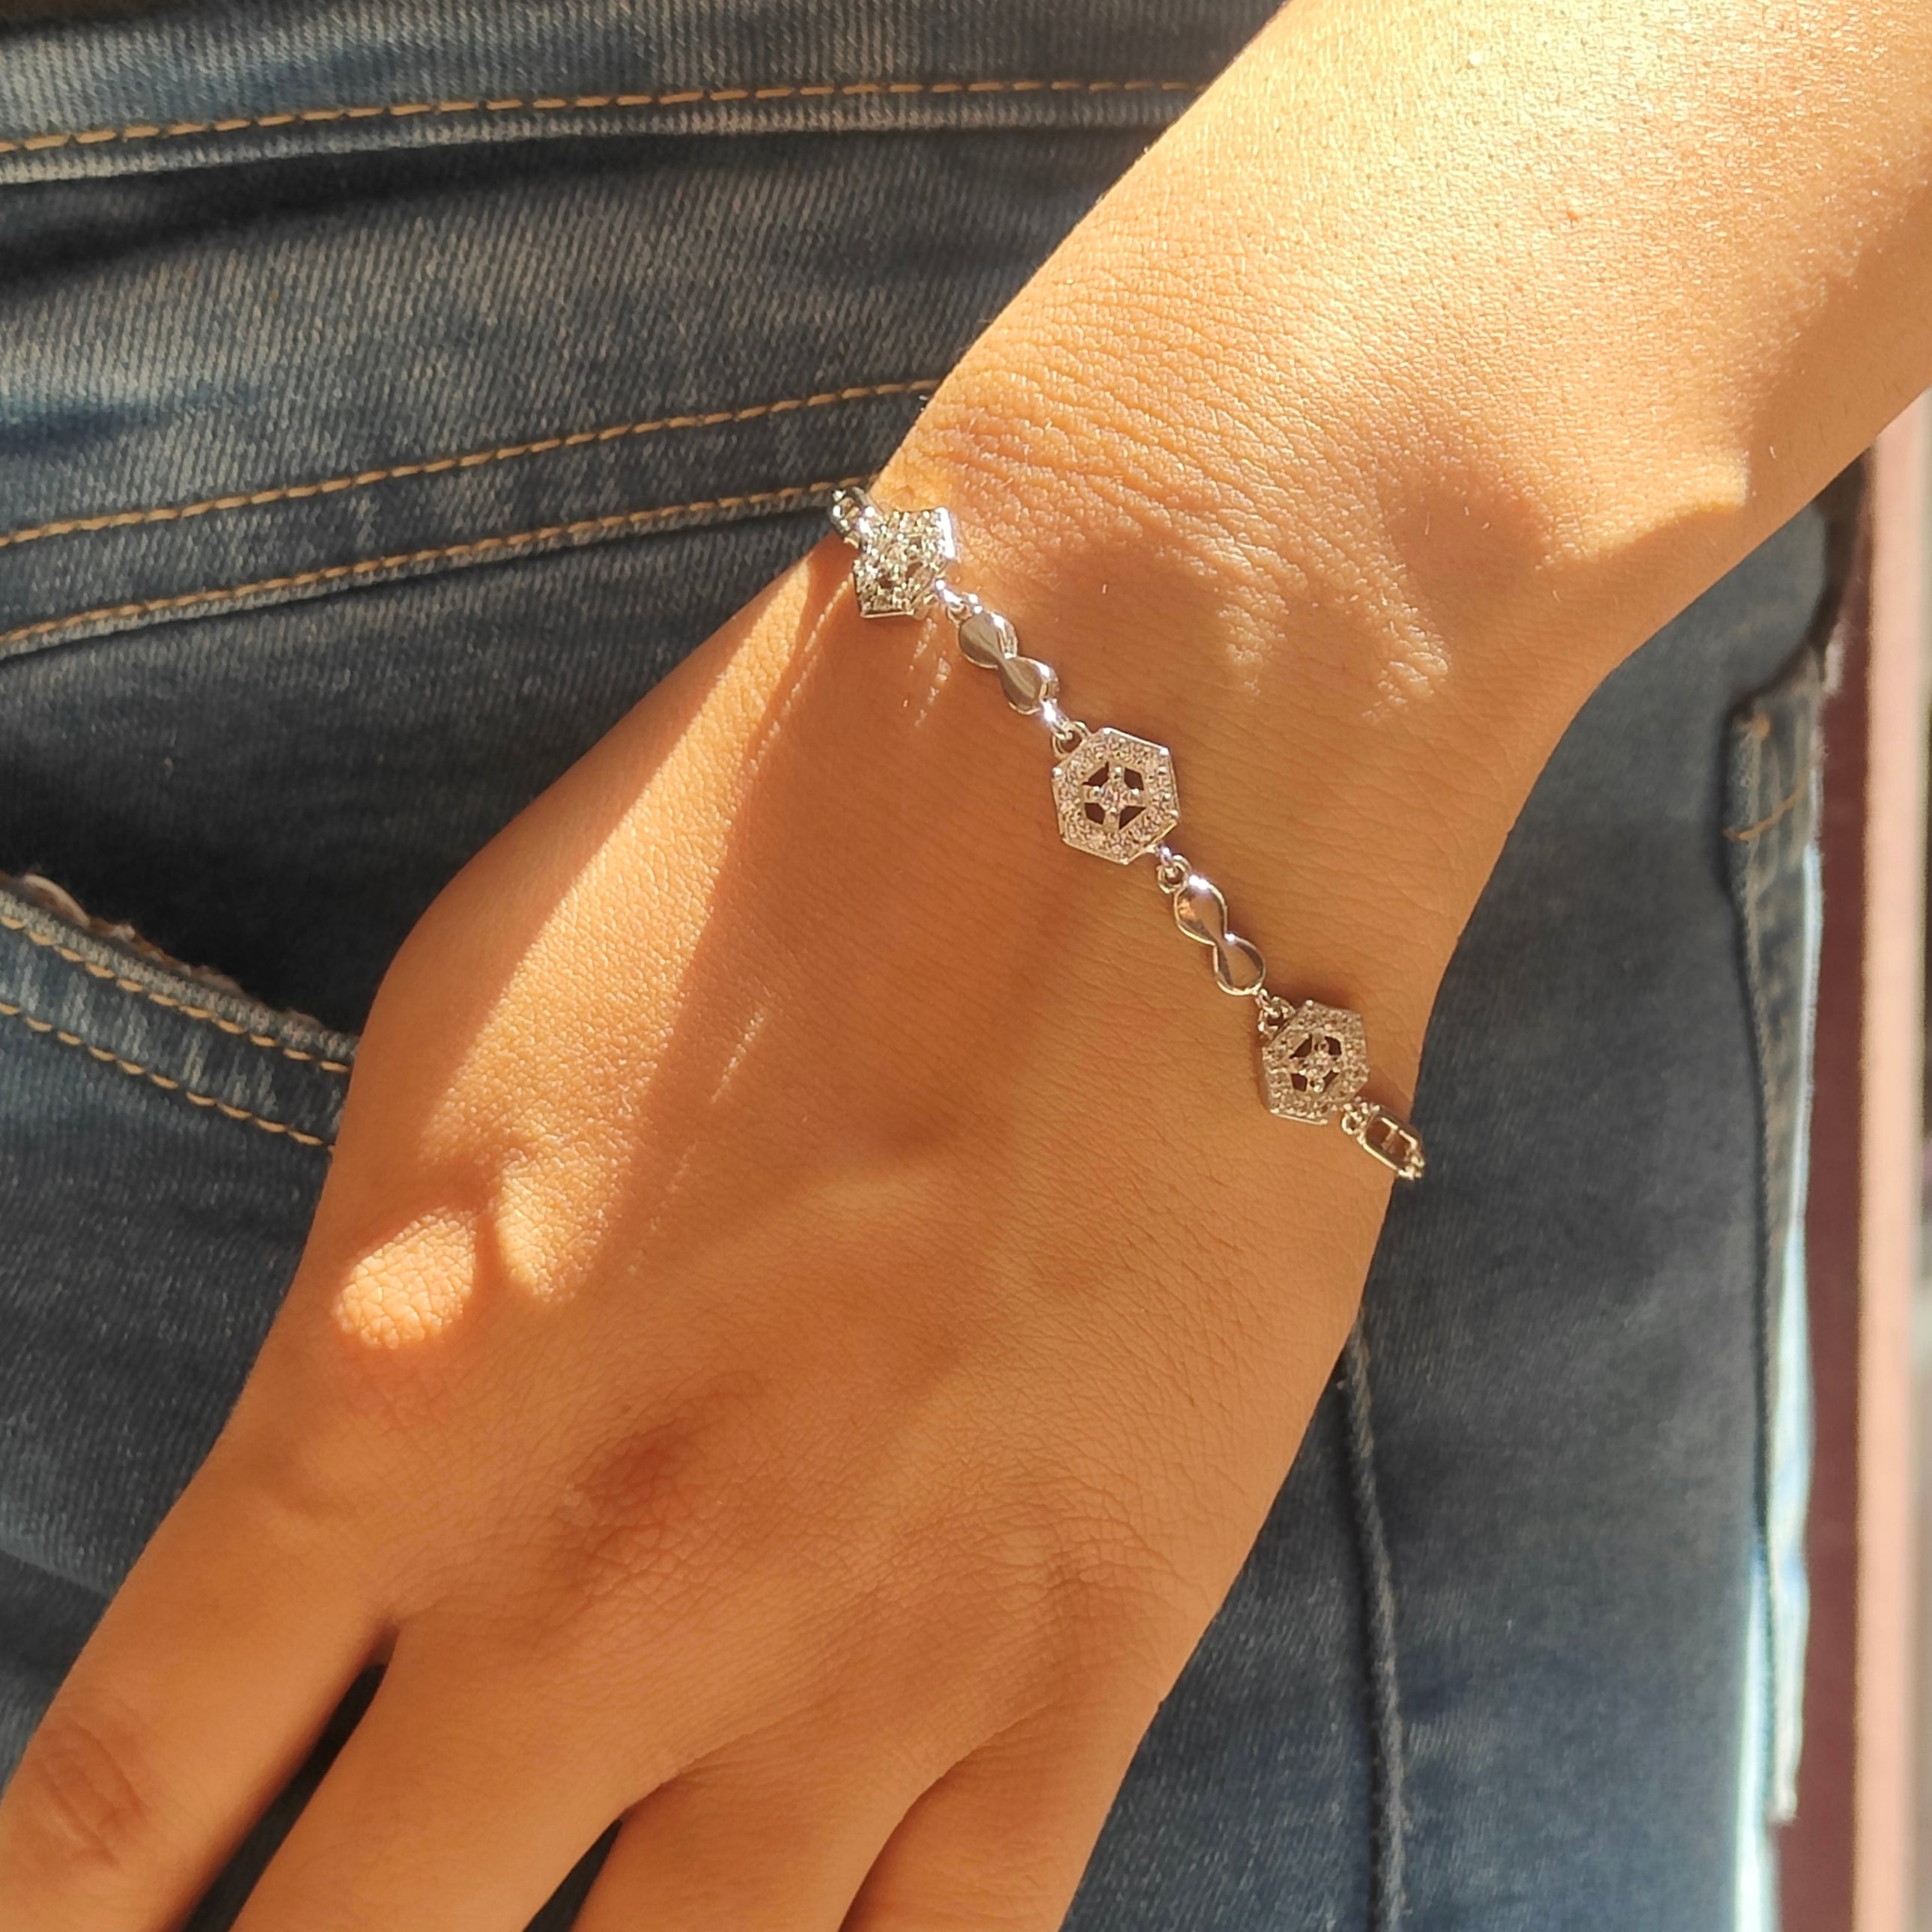 Hexagon Bracelet With engraved Diamonds Made in Sterling Silver